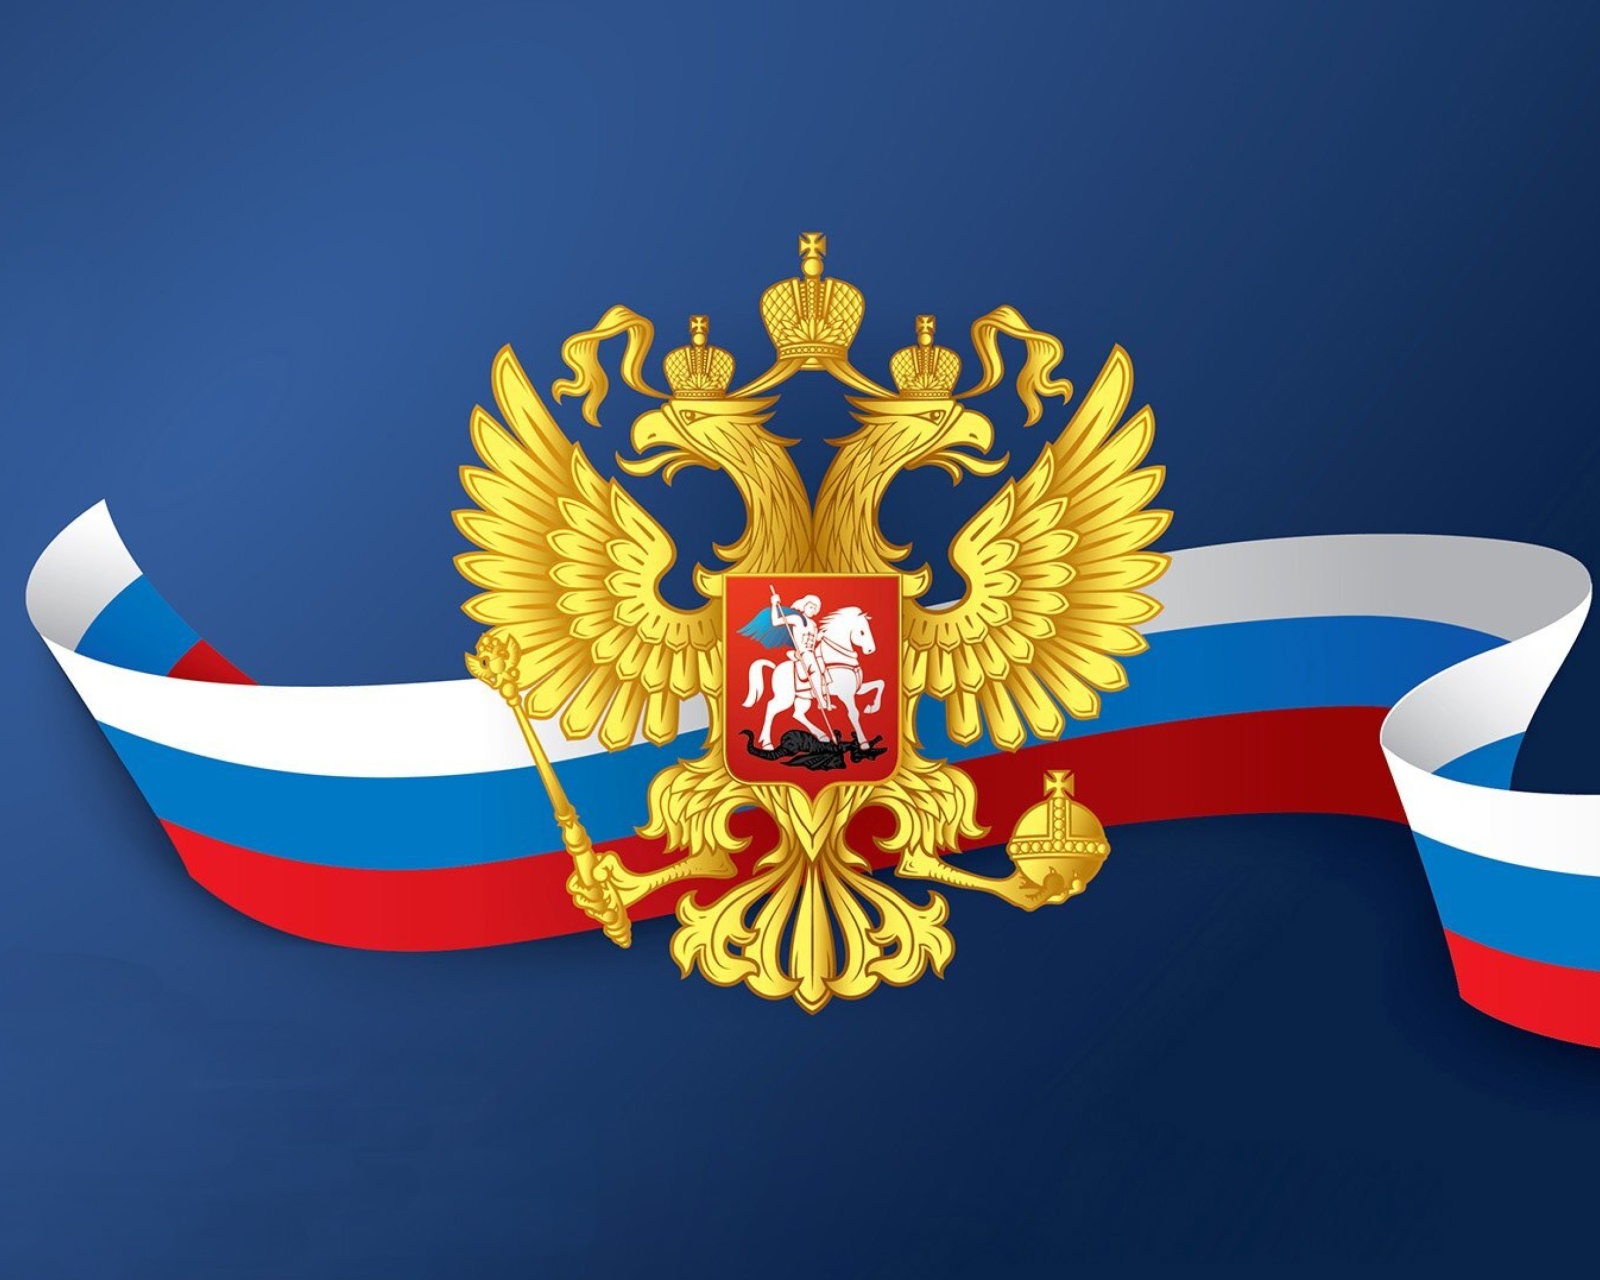 Russian coat of arms and flag screenshot #1 1600x1280